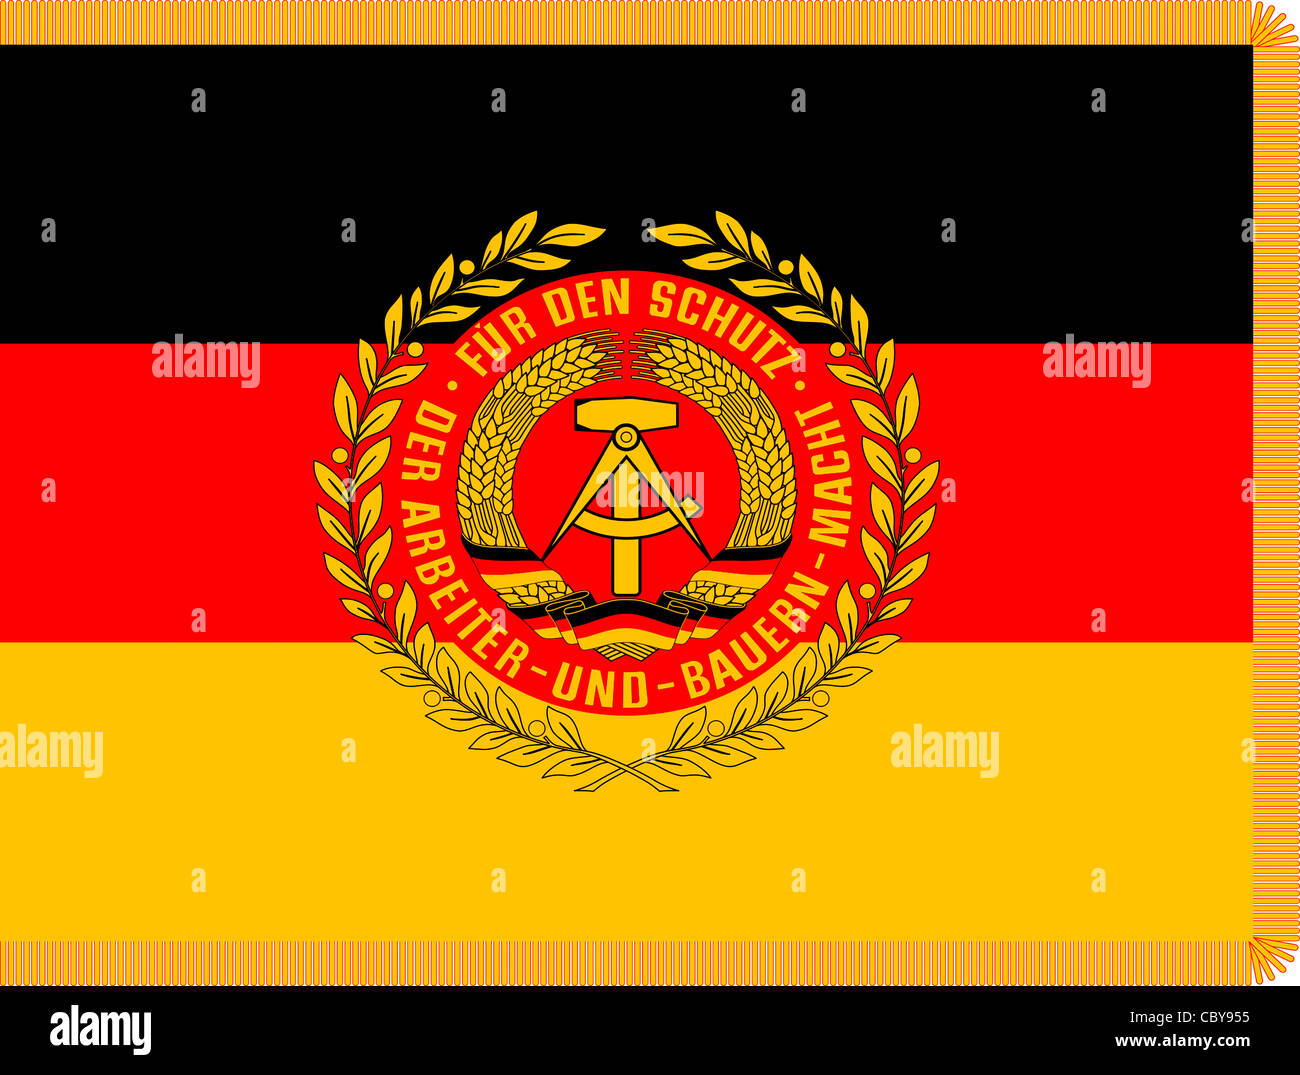 Flag of the National People's Army NVA with the coat of arms of the GDR. Stock Photo